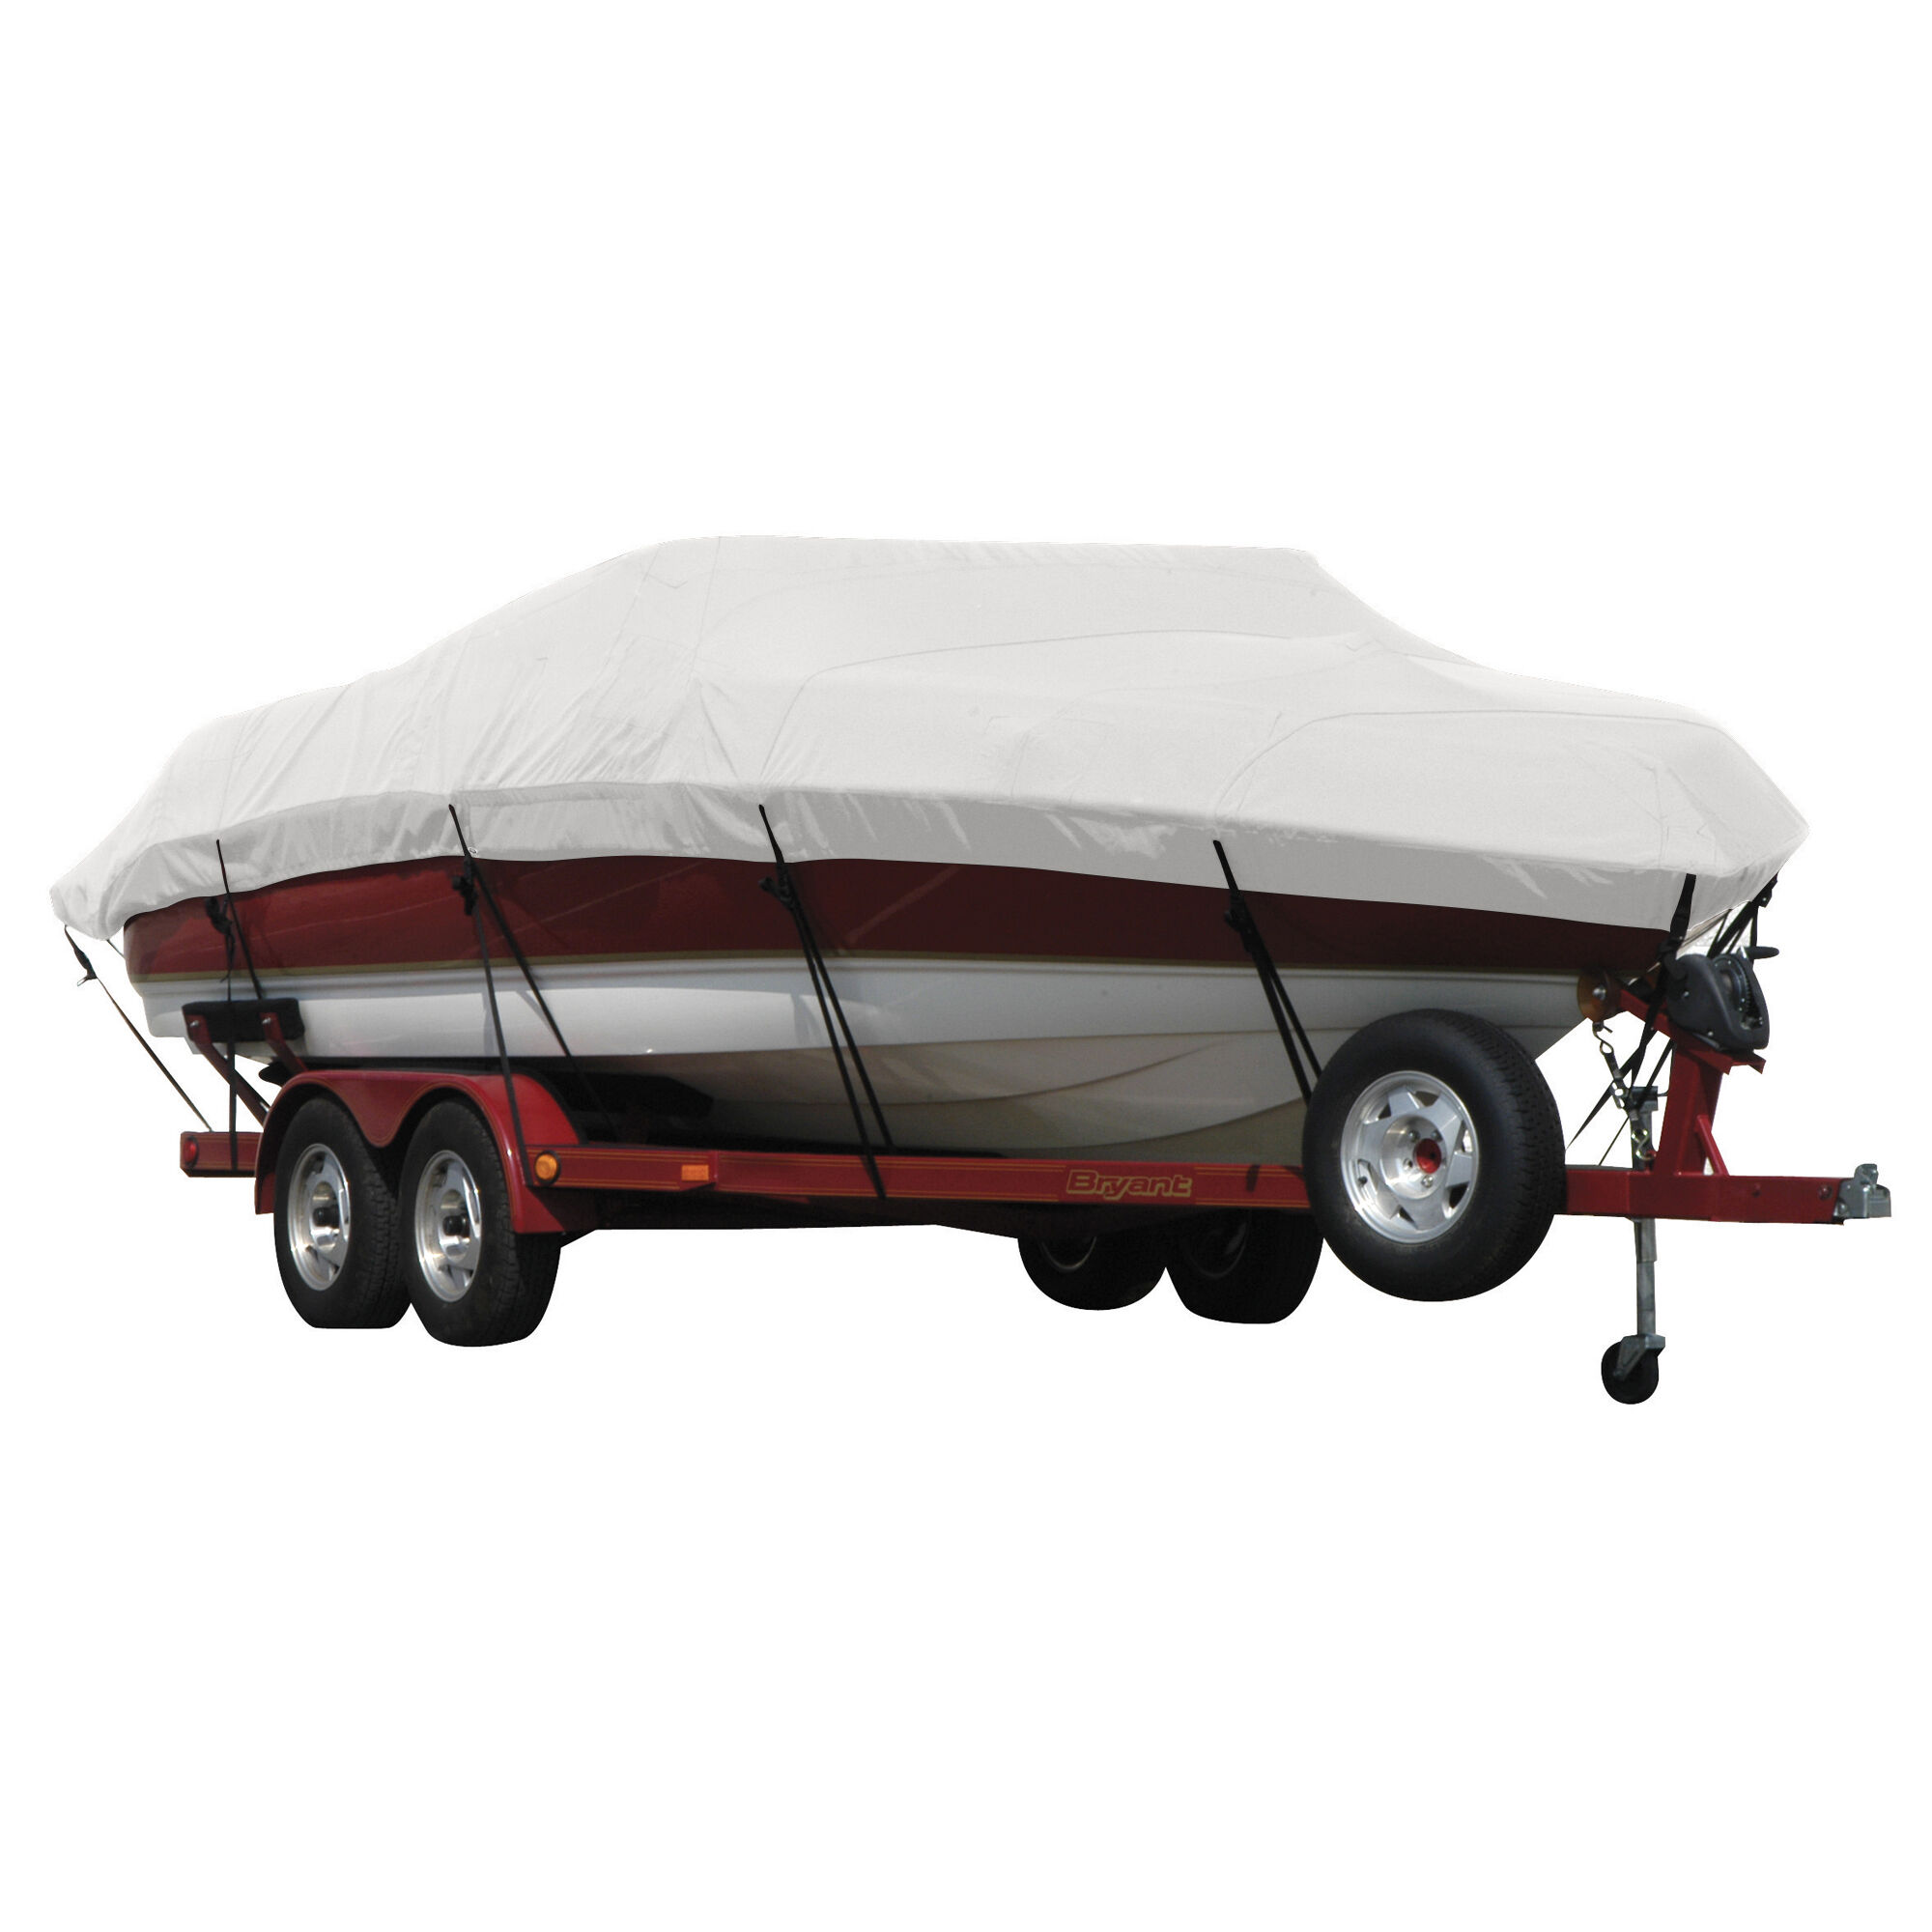 Covermate Exact Fit Sunbrella Boat Cover for Campion Chase 580 Zri/Zricd Chase 580 Zri/Zricd I/O. Natural in Natural Tan